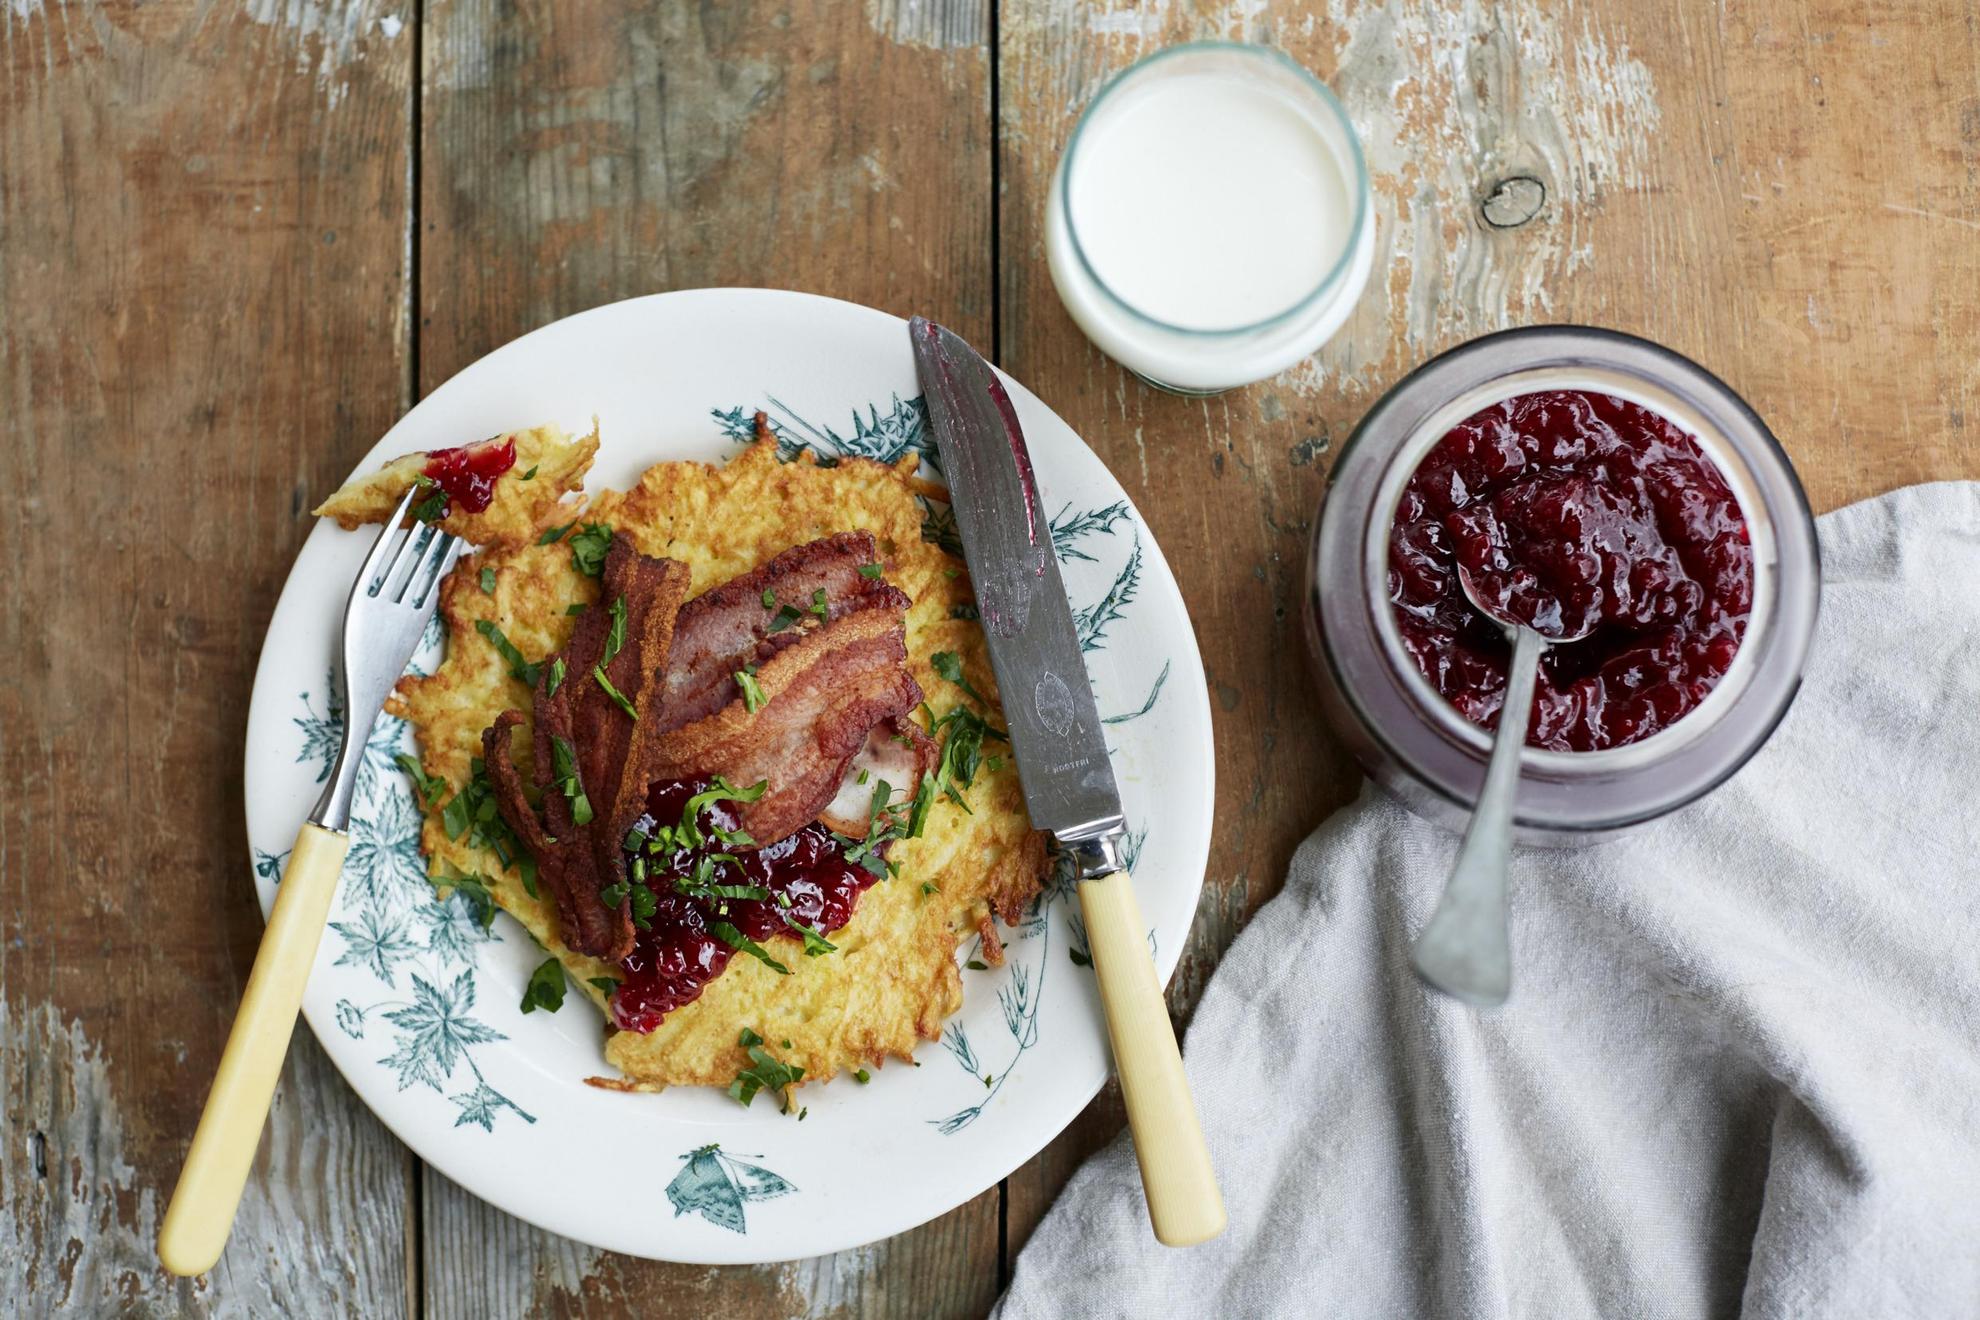 Seen from above, a wooden table is set with a plate of potato pancakes and bacon, a jar of lingonberry jam and a glass of milk.